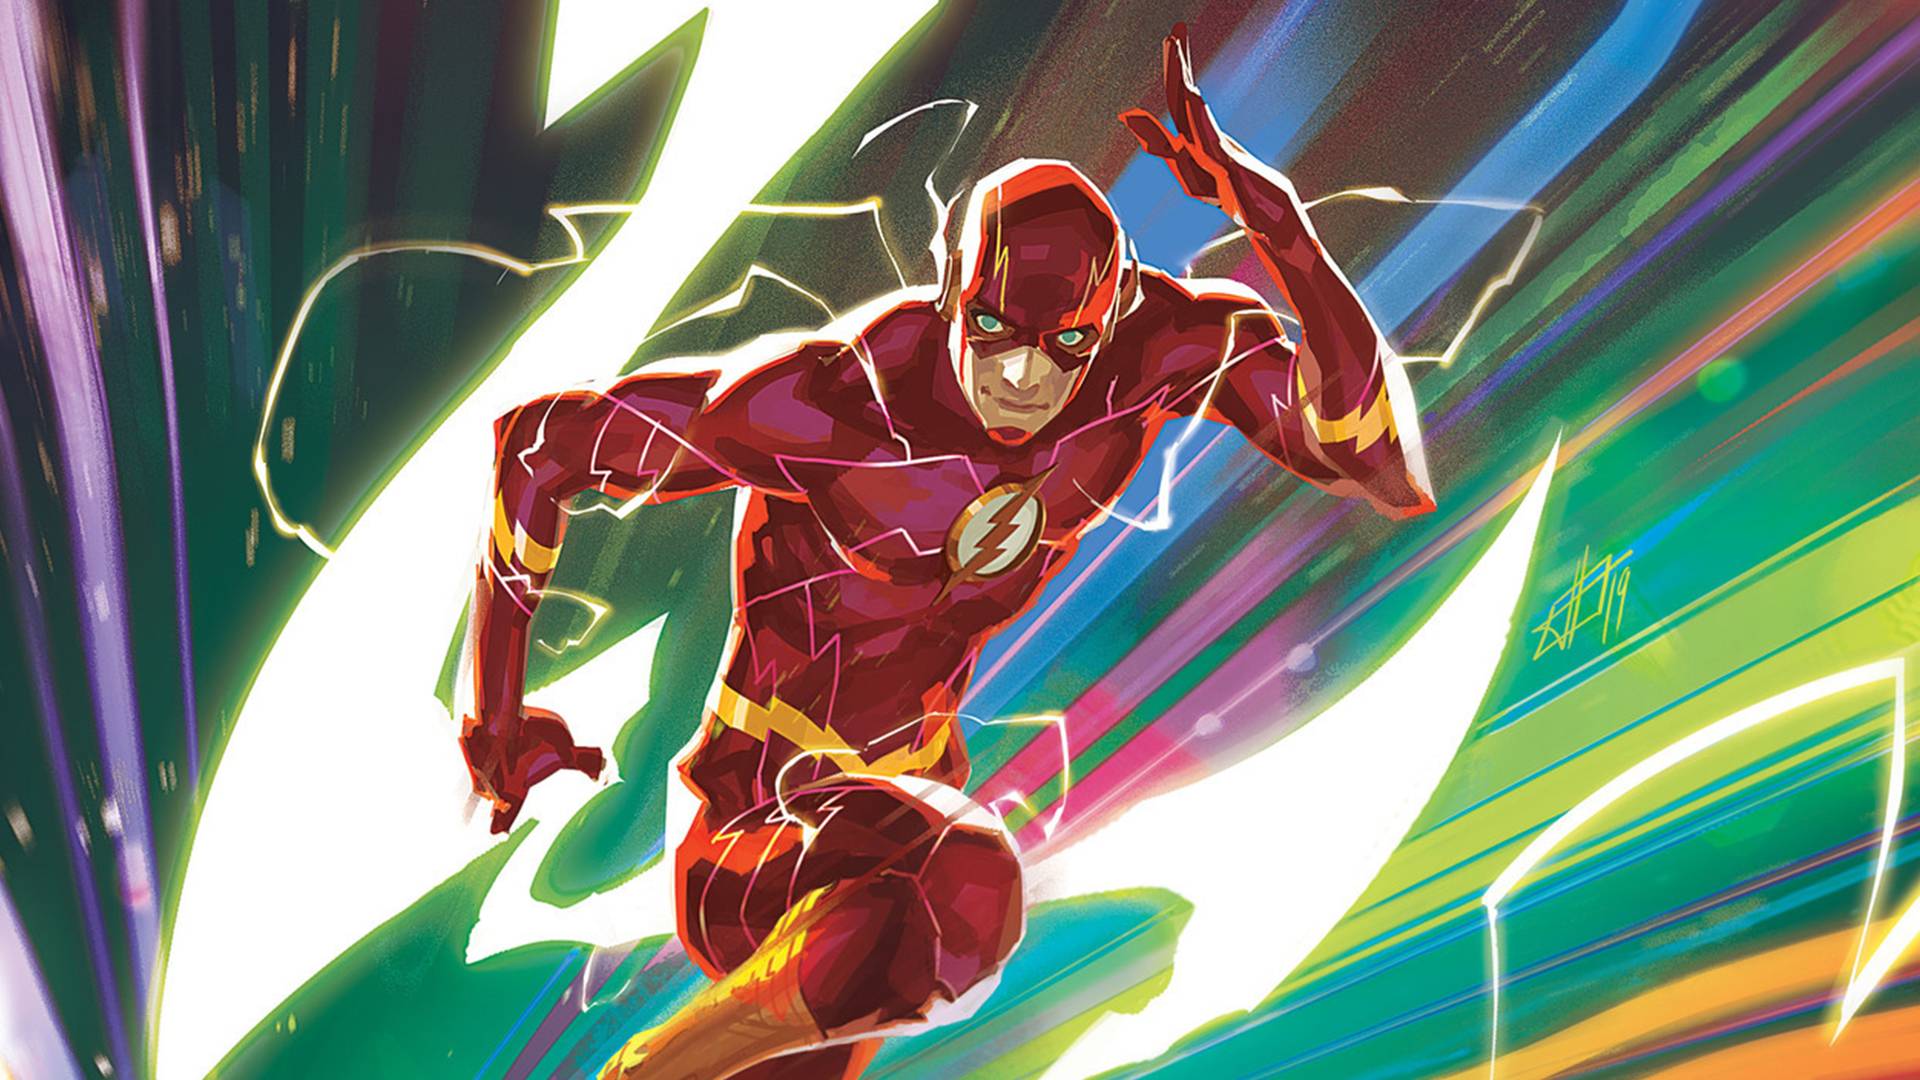 The Flash Art Wallpapers - Top Free The